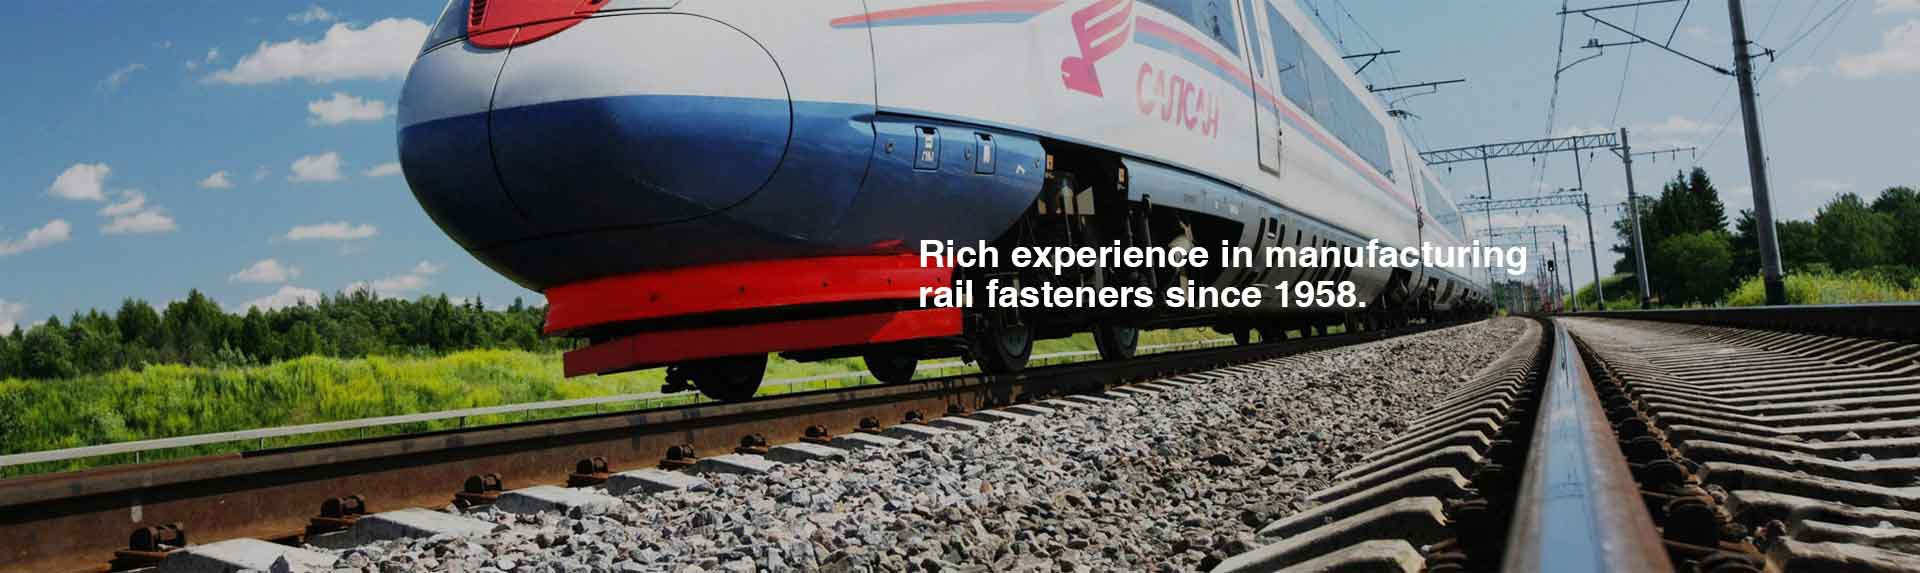 rich experience in rail fastener manufacturing since 1958